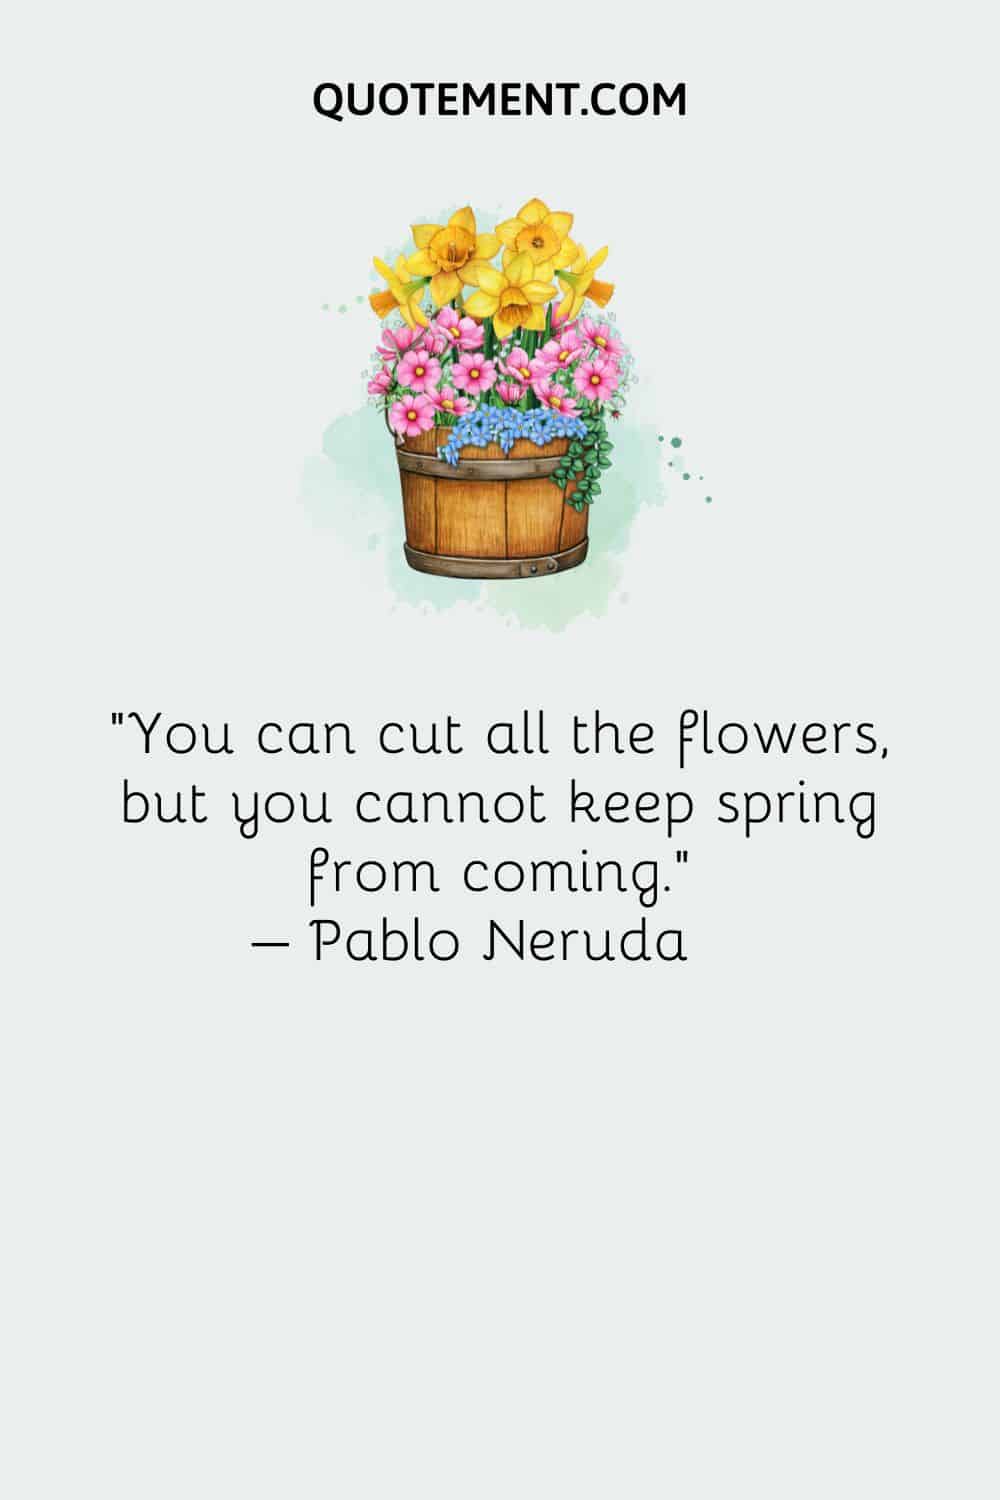 You can cut all the flowers, but you cannot keep spring from coming. – Pablo Neruda